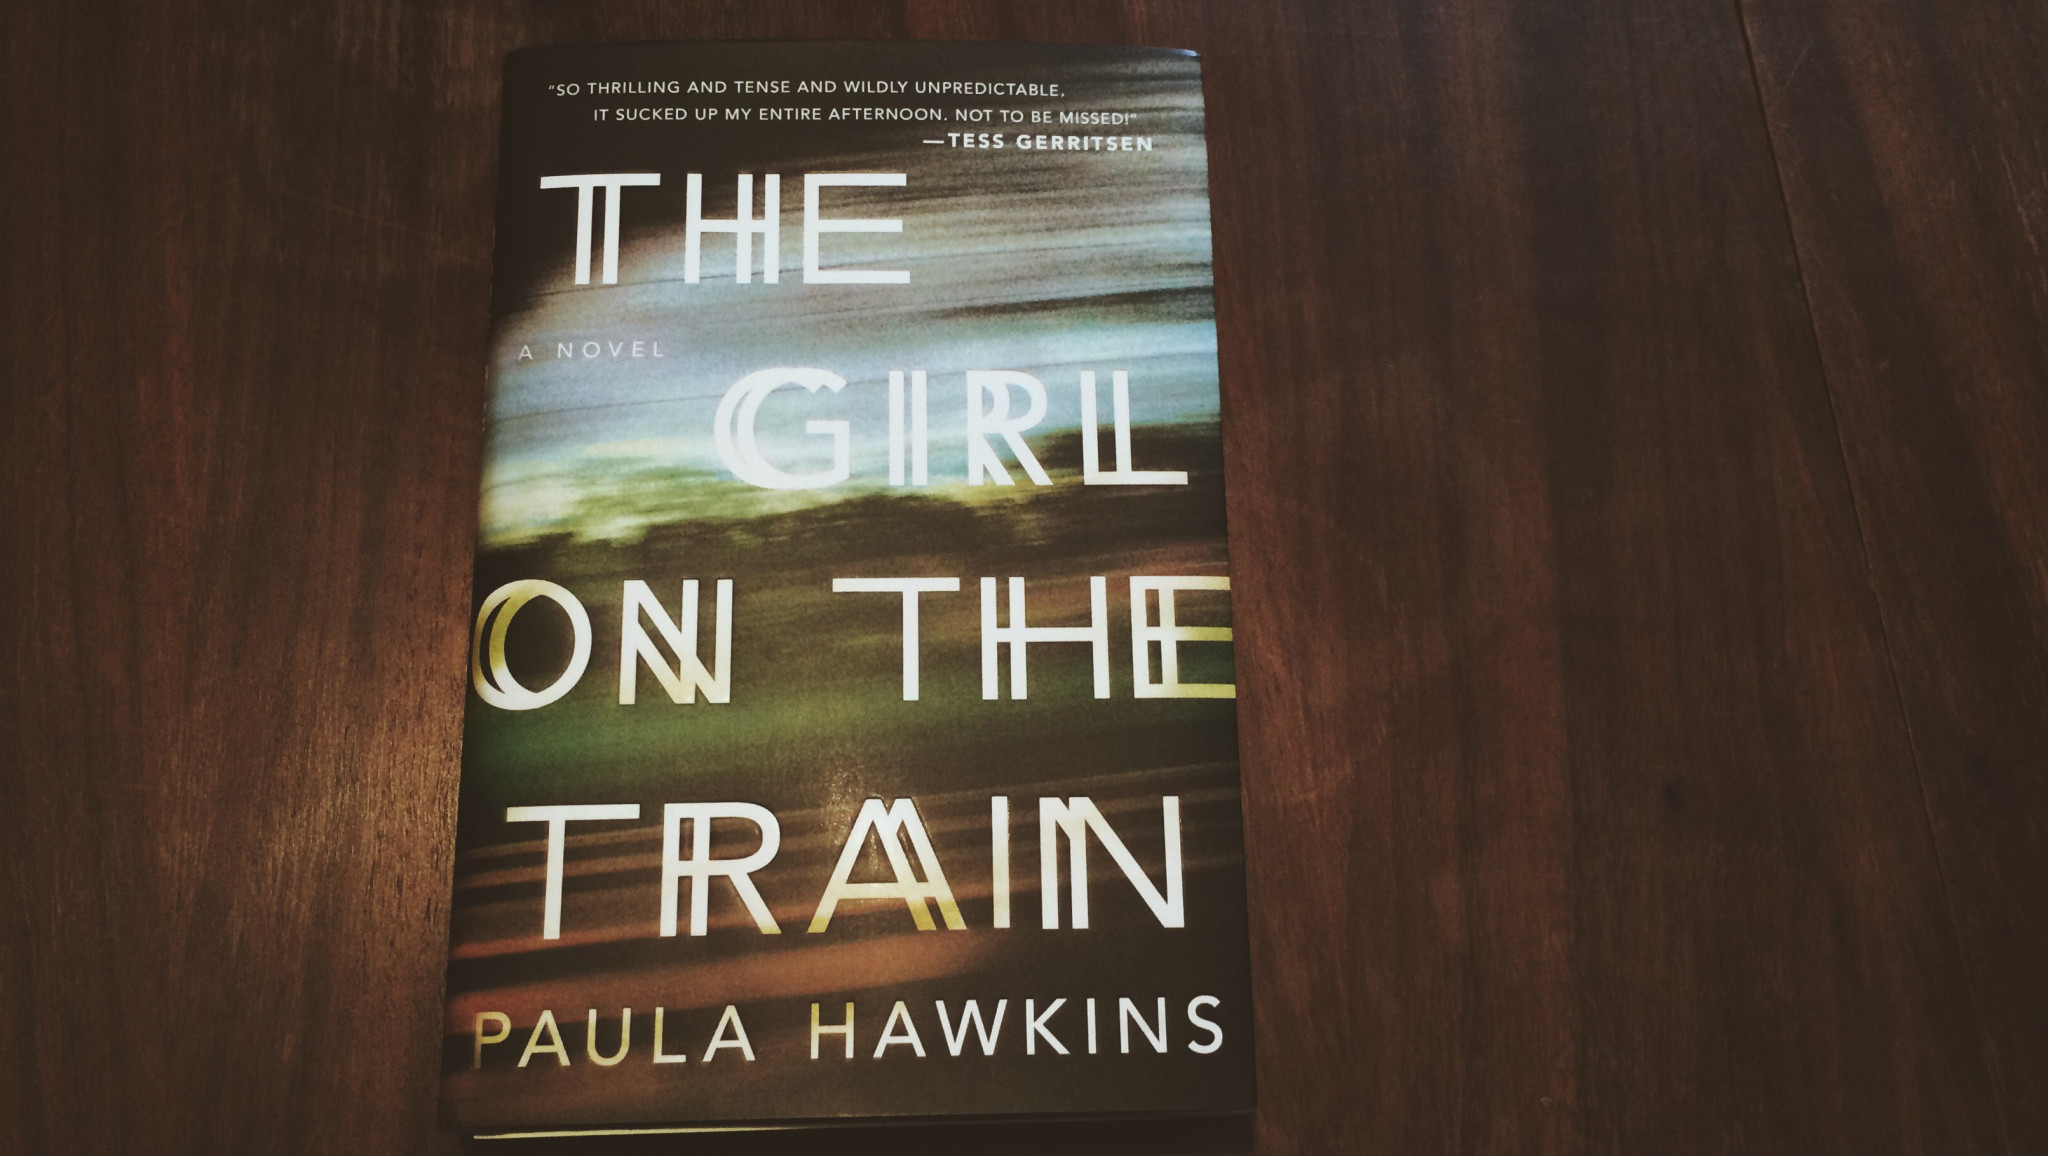 The Girl On The Train – You Don’t Know Her, But She Knows You